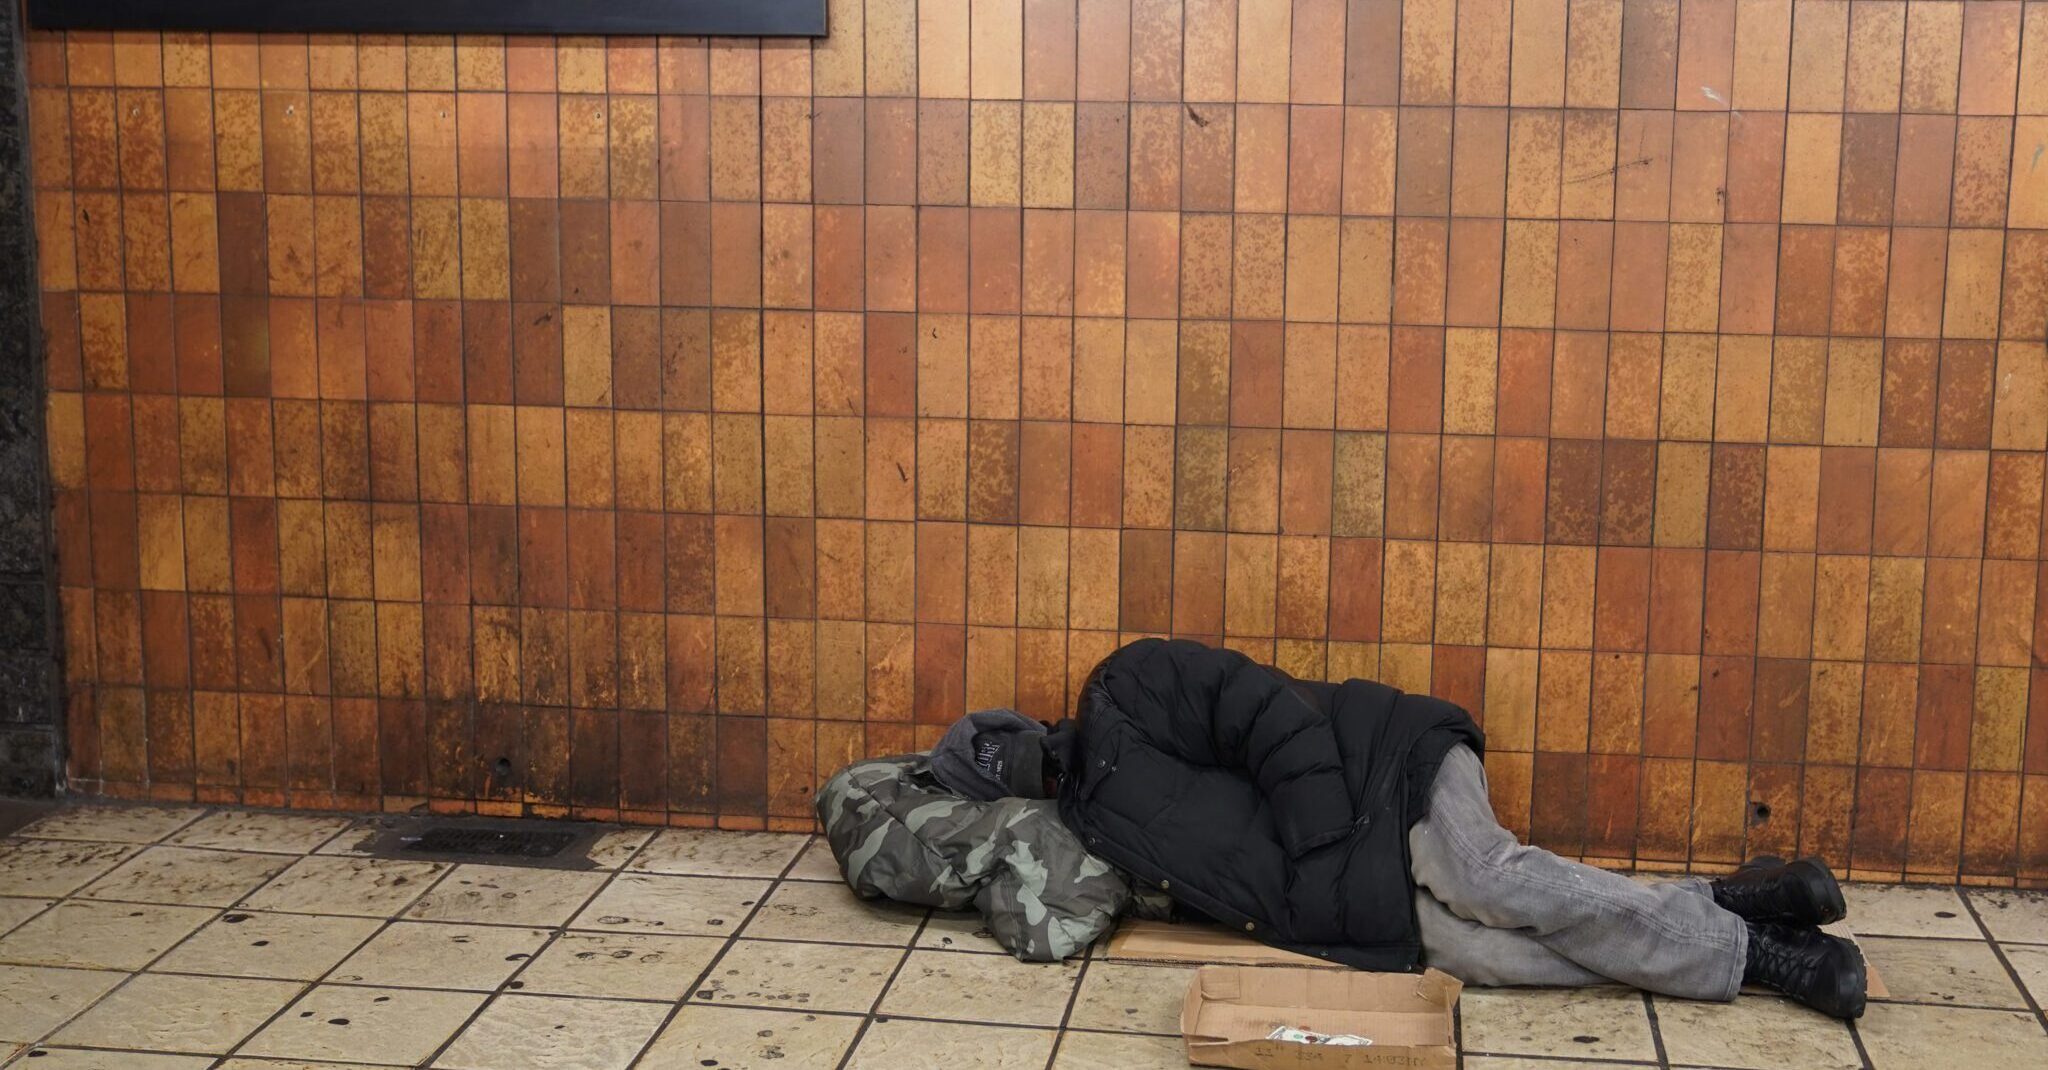 Yes, the Homeless Are More Violent